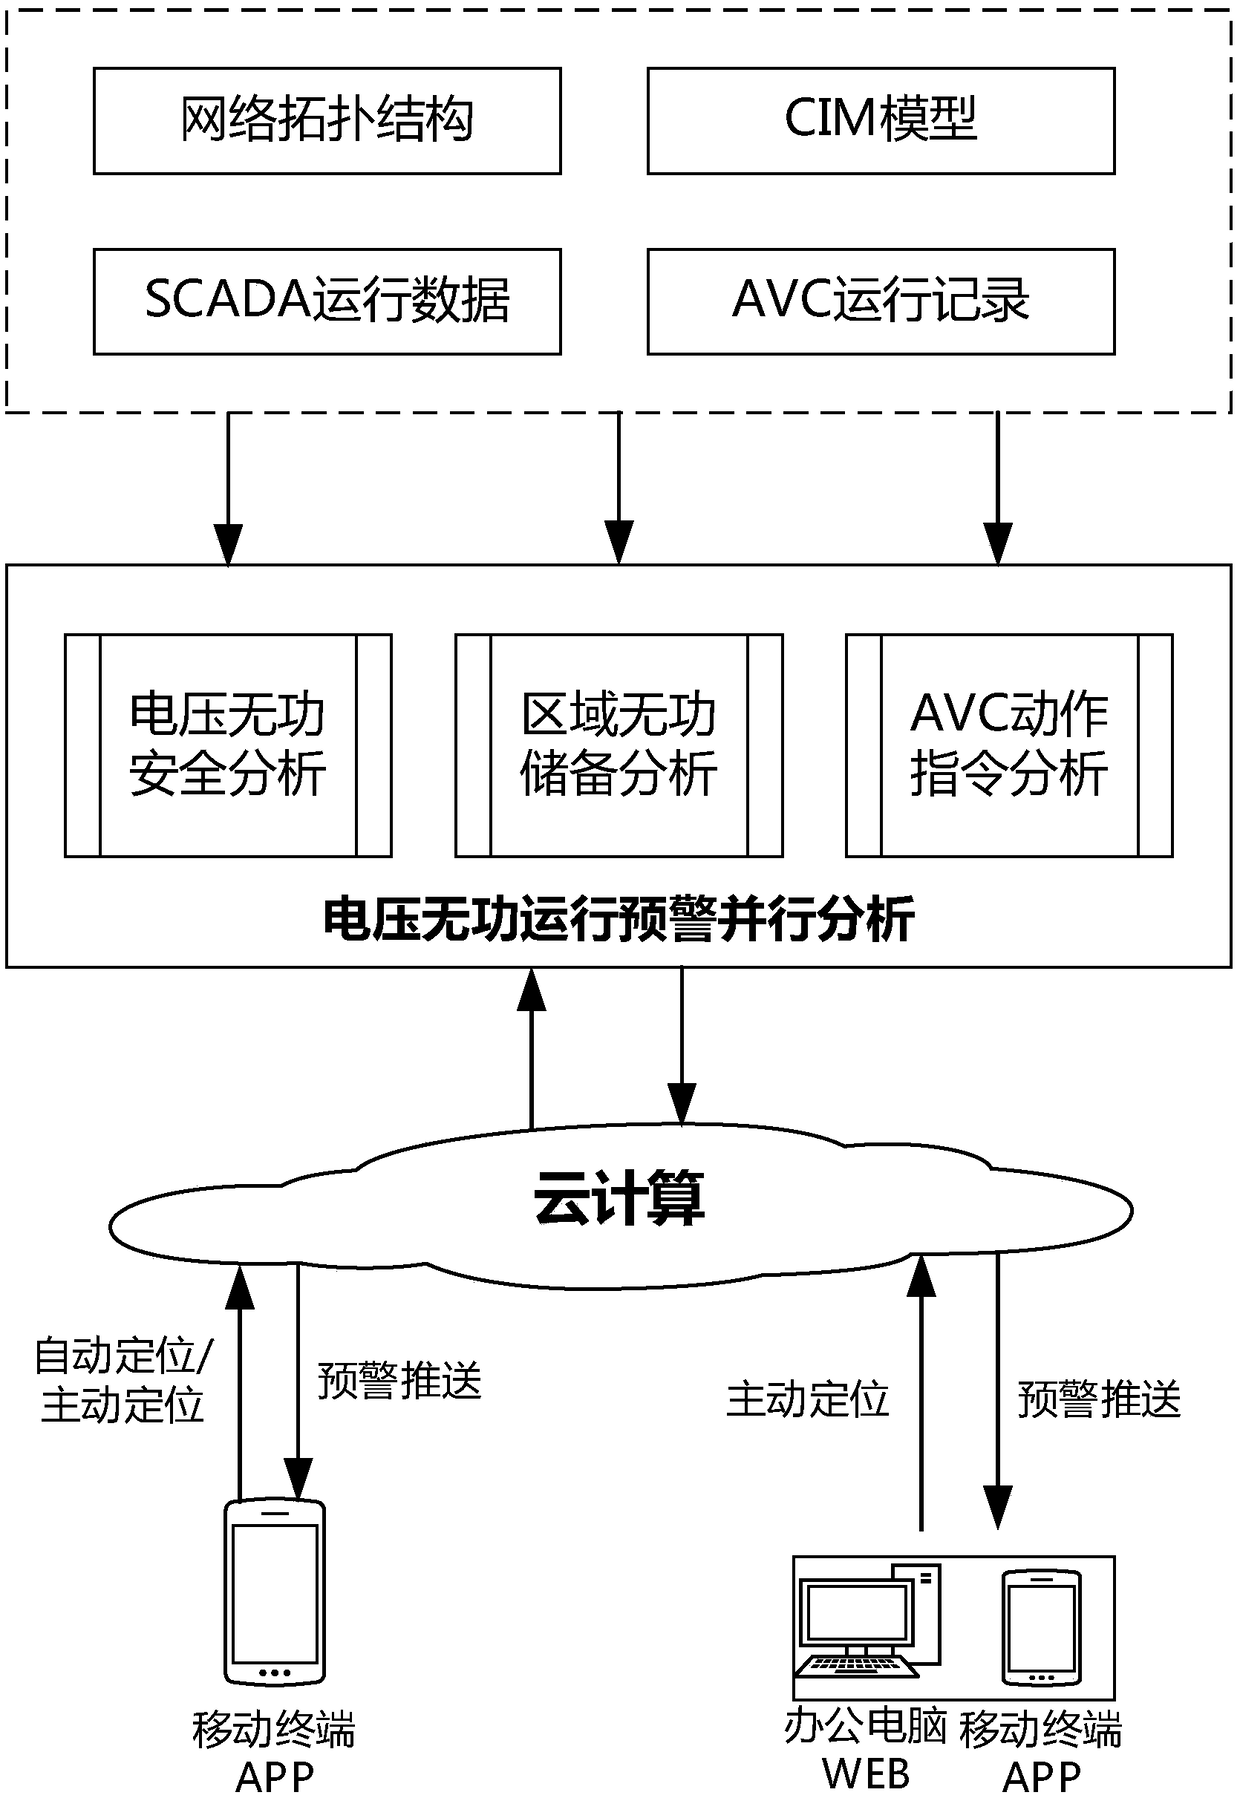 Voltage reactive power operation early warning method and system